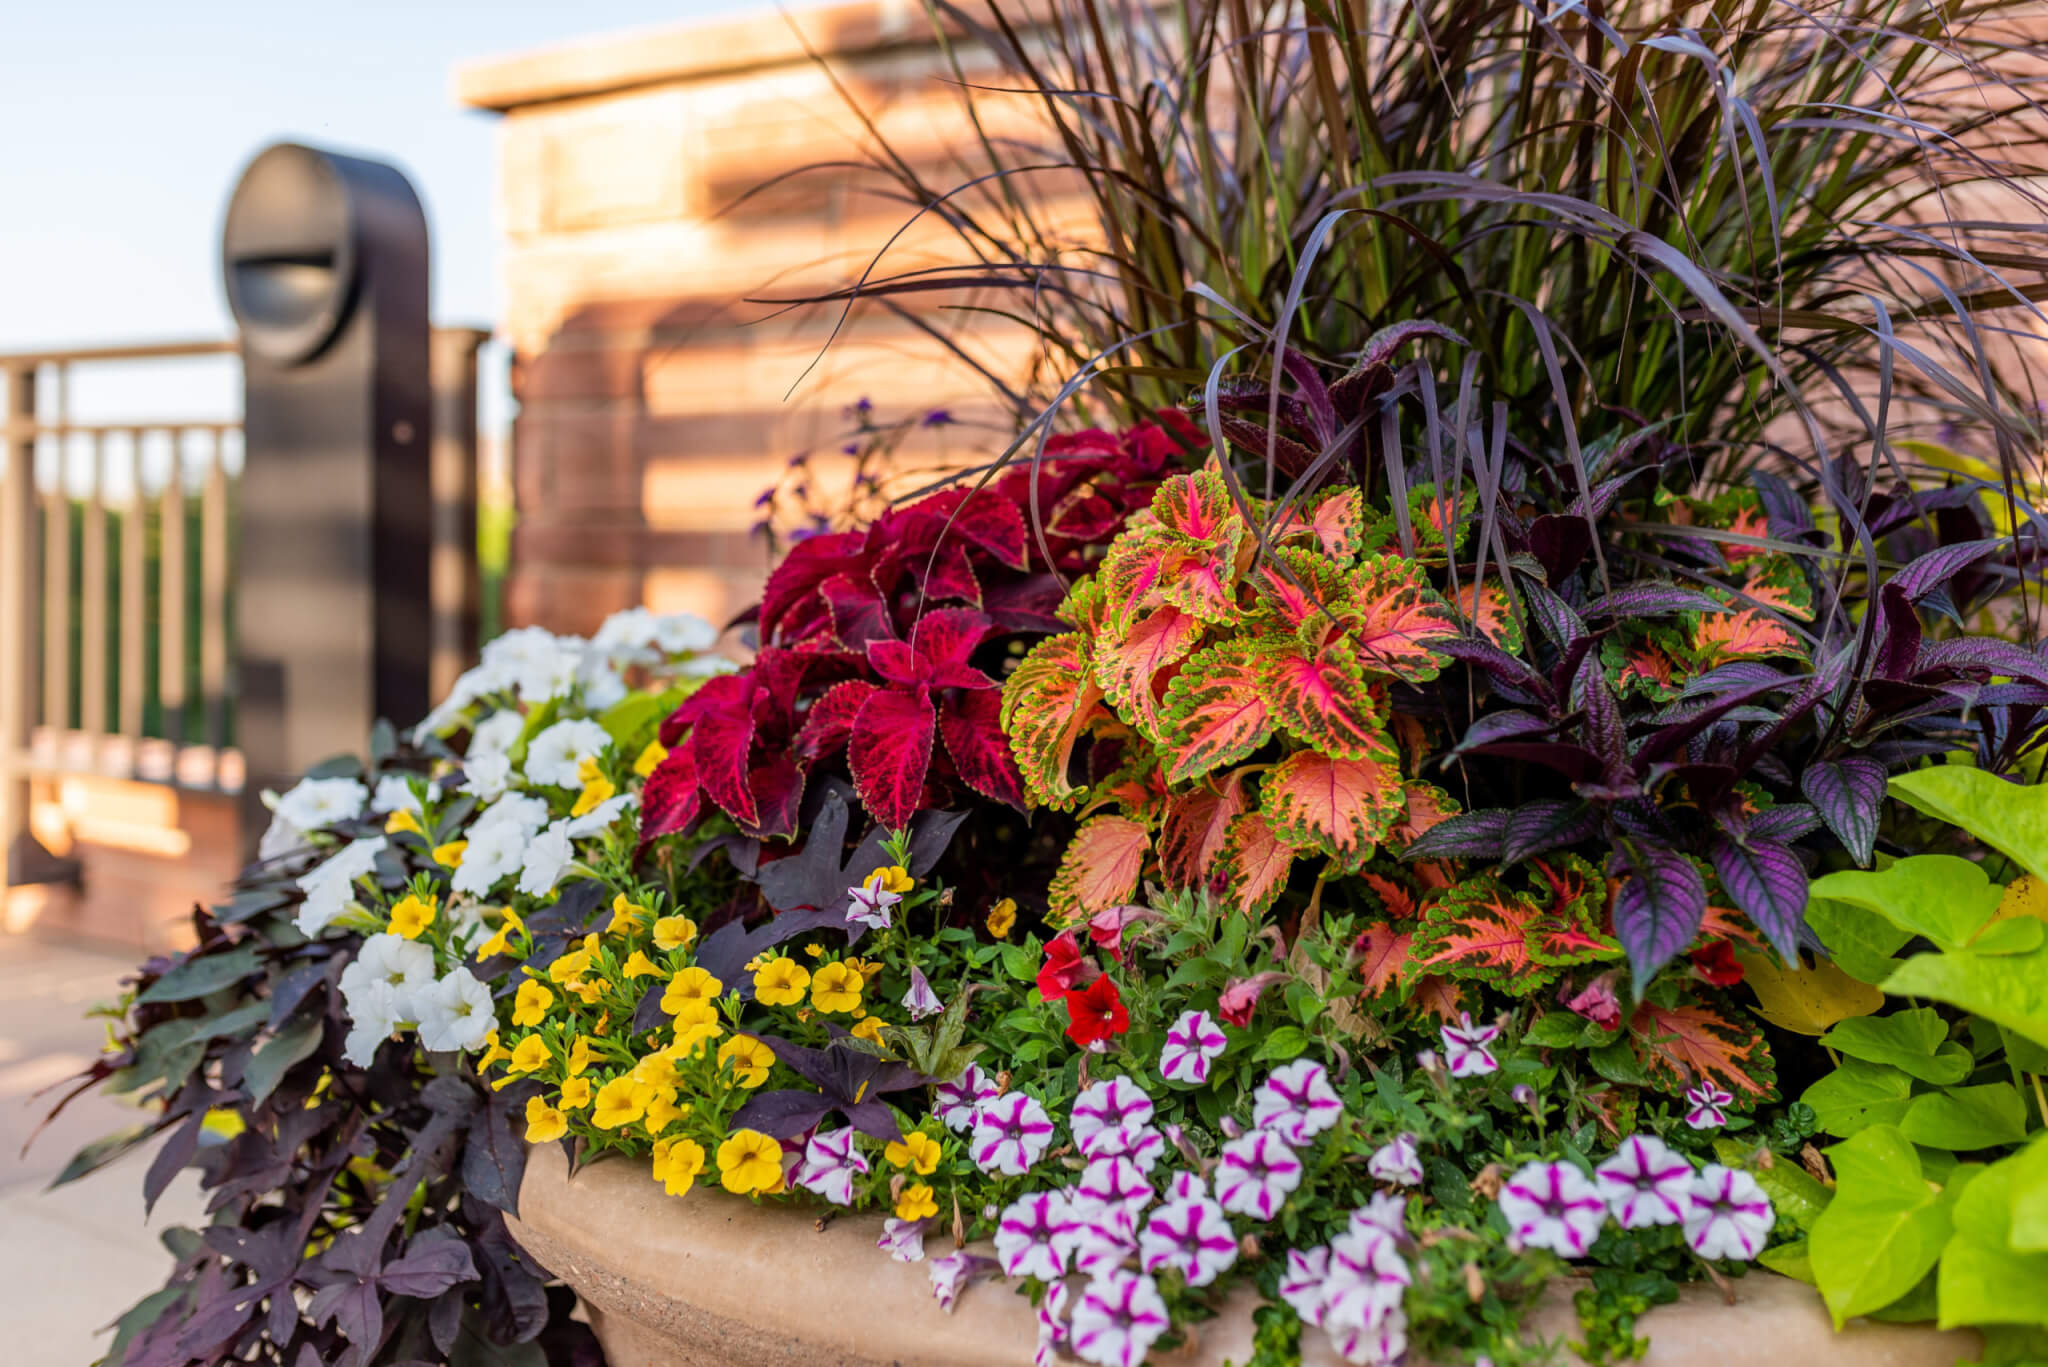 A big flower pot filled with colourful flower plants